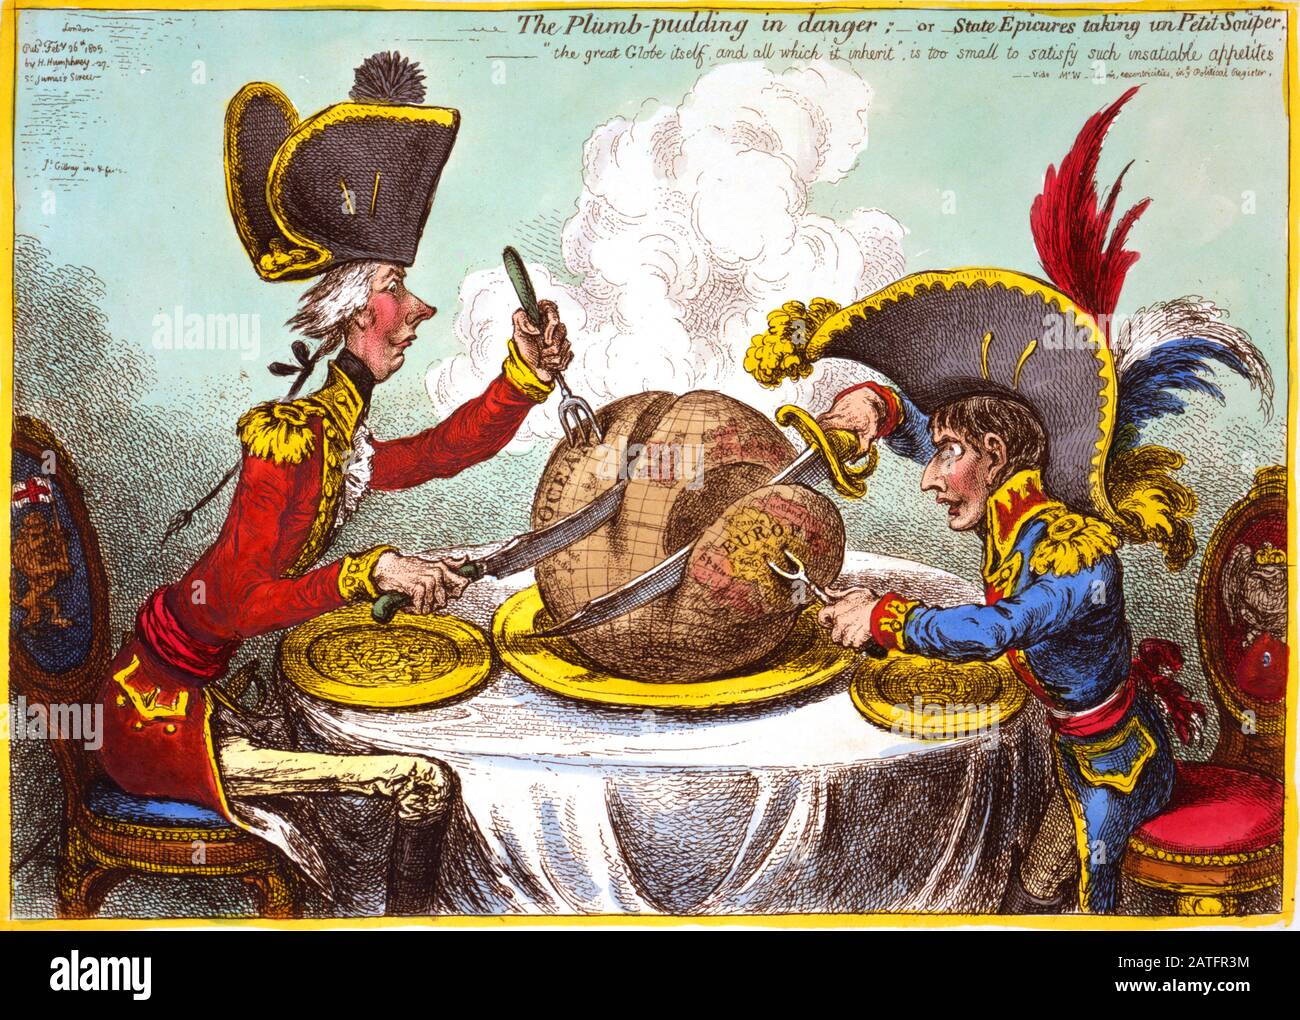 William Pitt and Napoleon depicted in a satirical cartoon. The Plumb-pudding in Danger (1805). By James Gillray. The world being carved up into spheres of influence between Pitt and Napoleon. Stock Photo